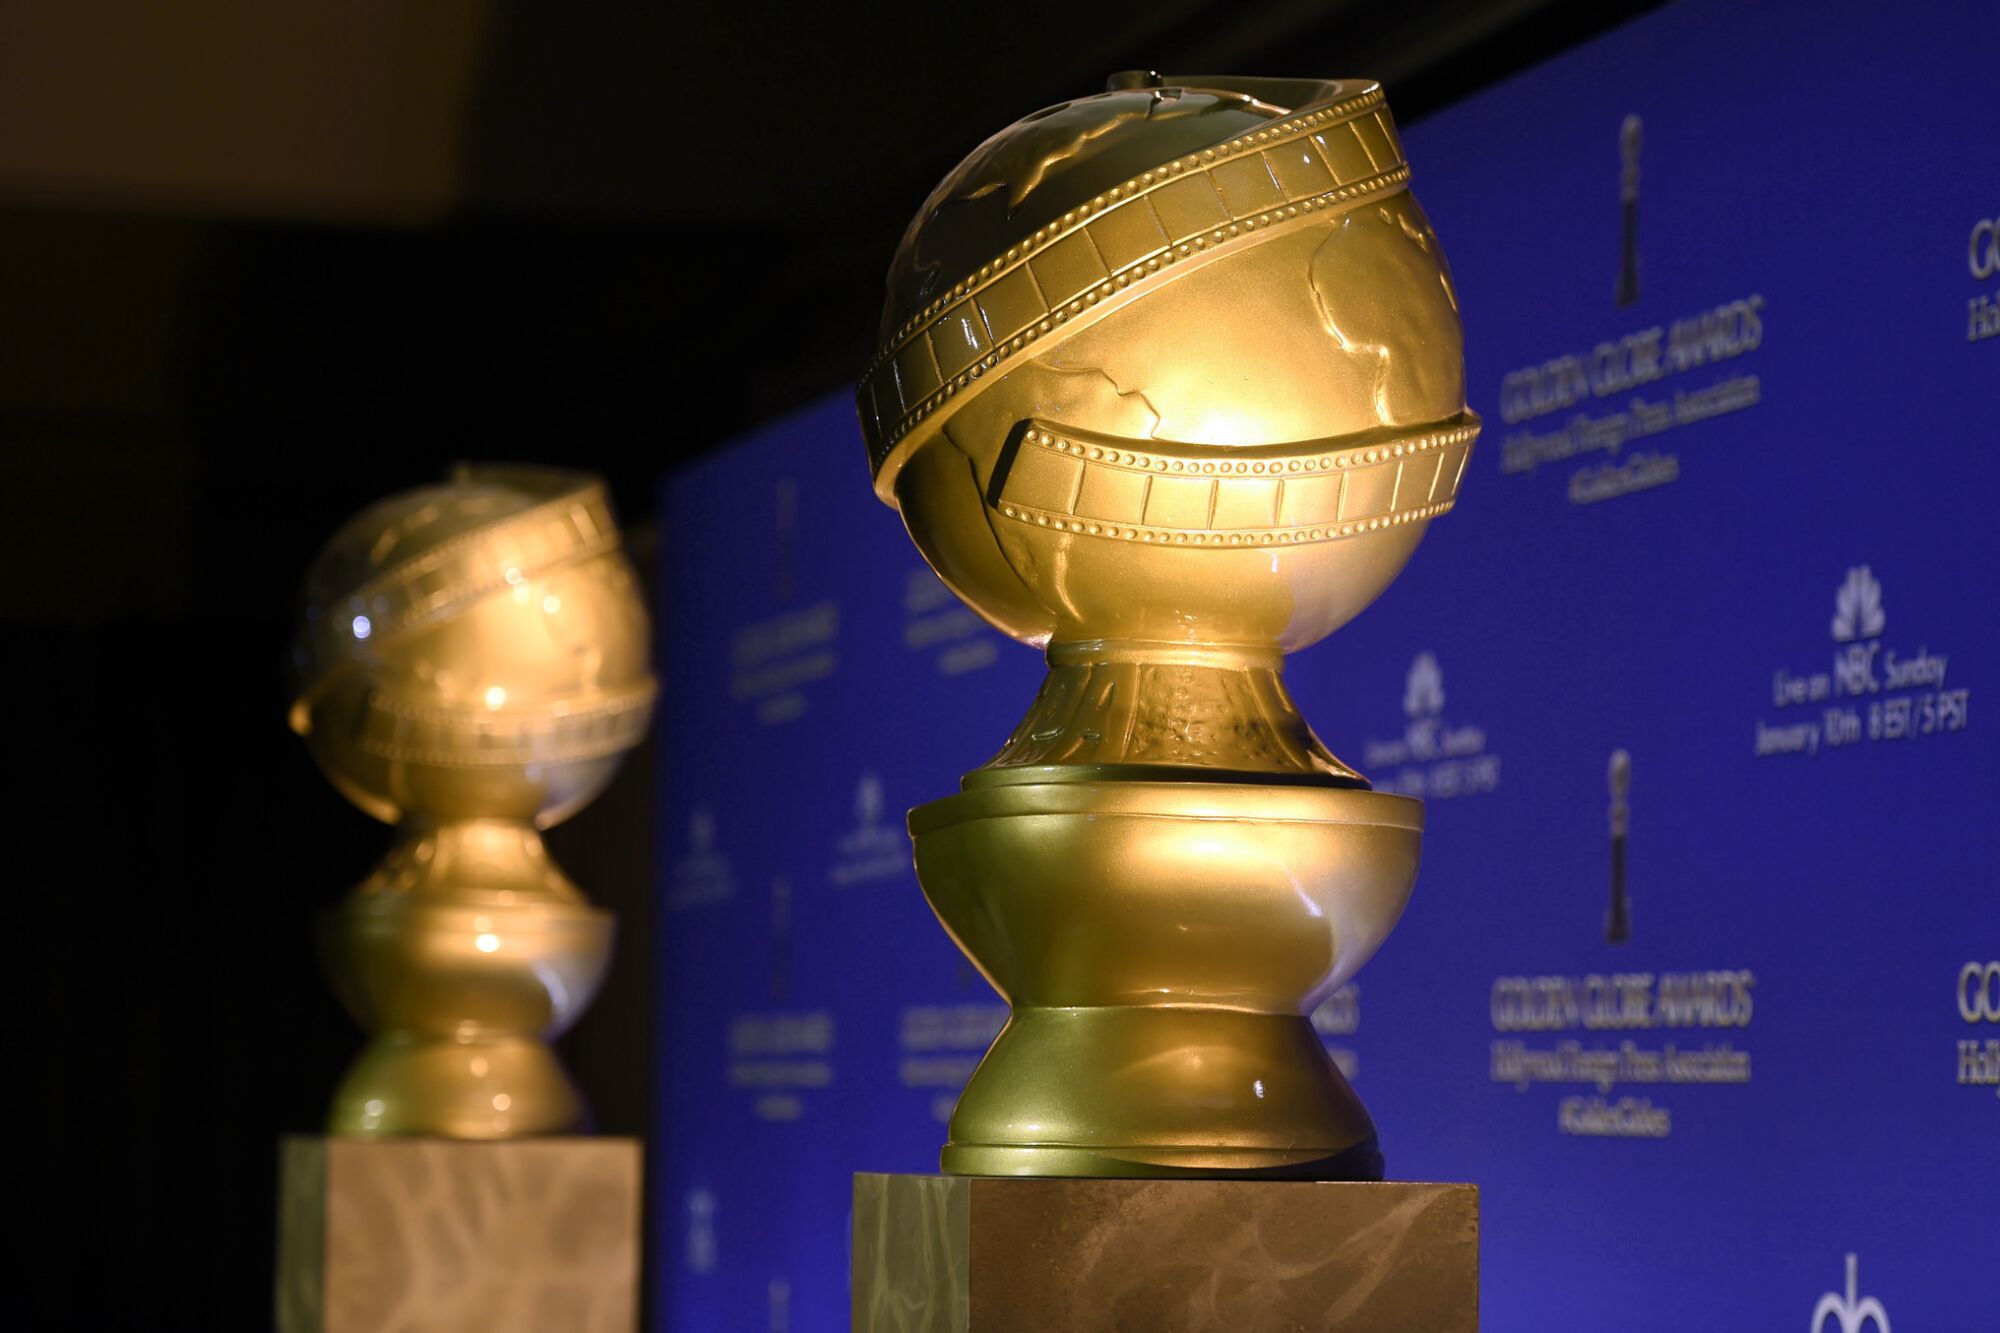 Replicas of Golden Globe statuettes against a blue backdrop